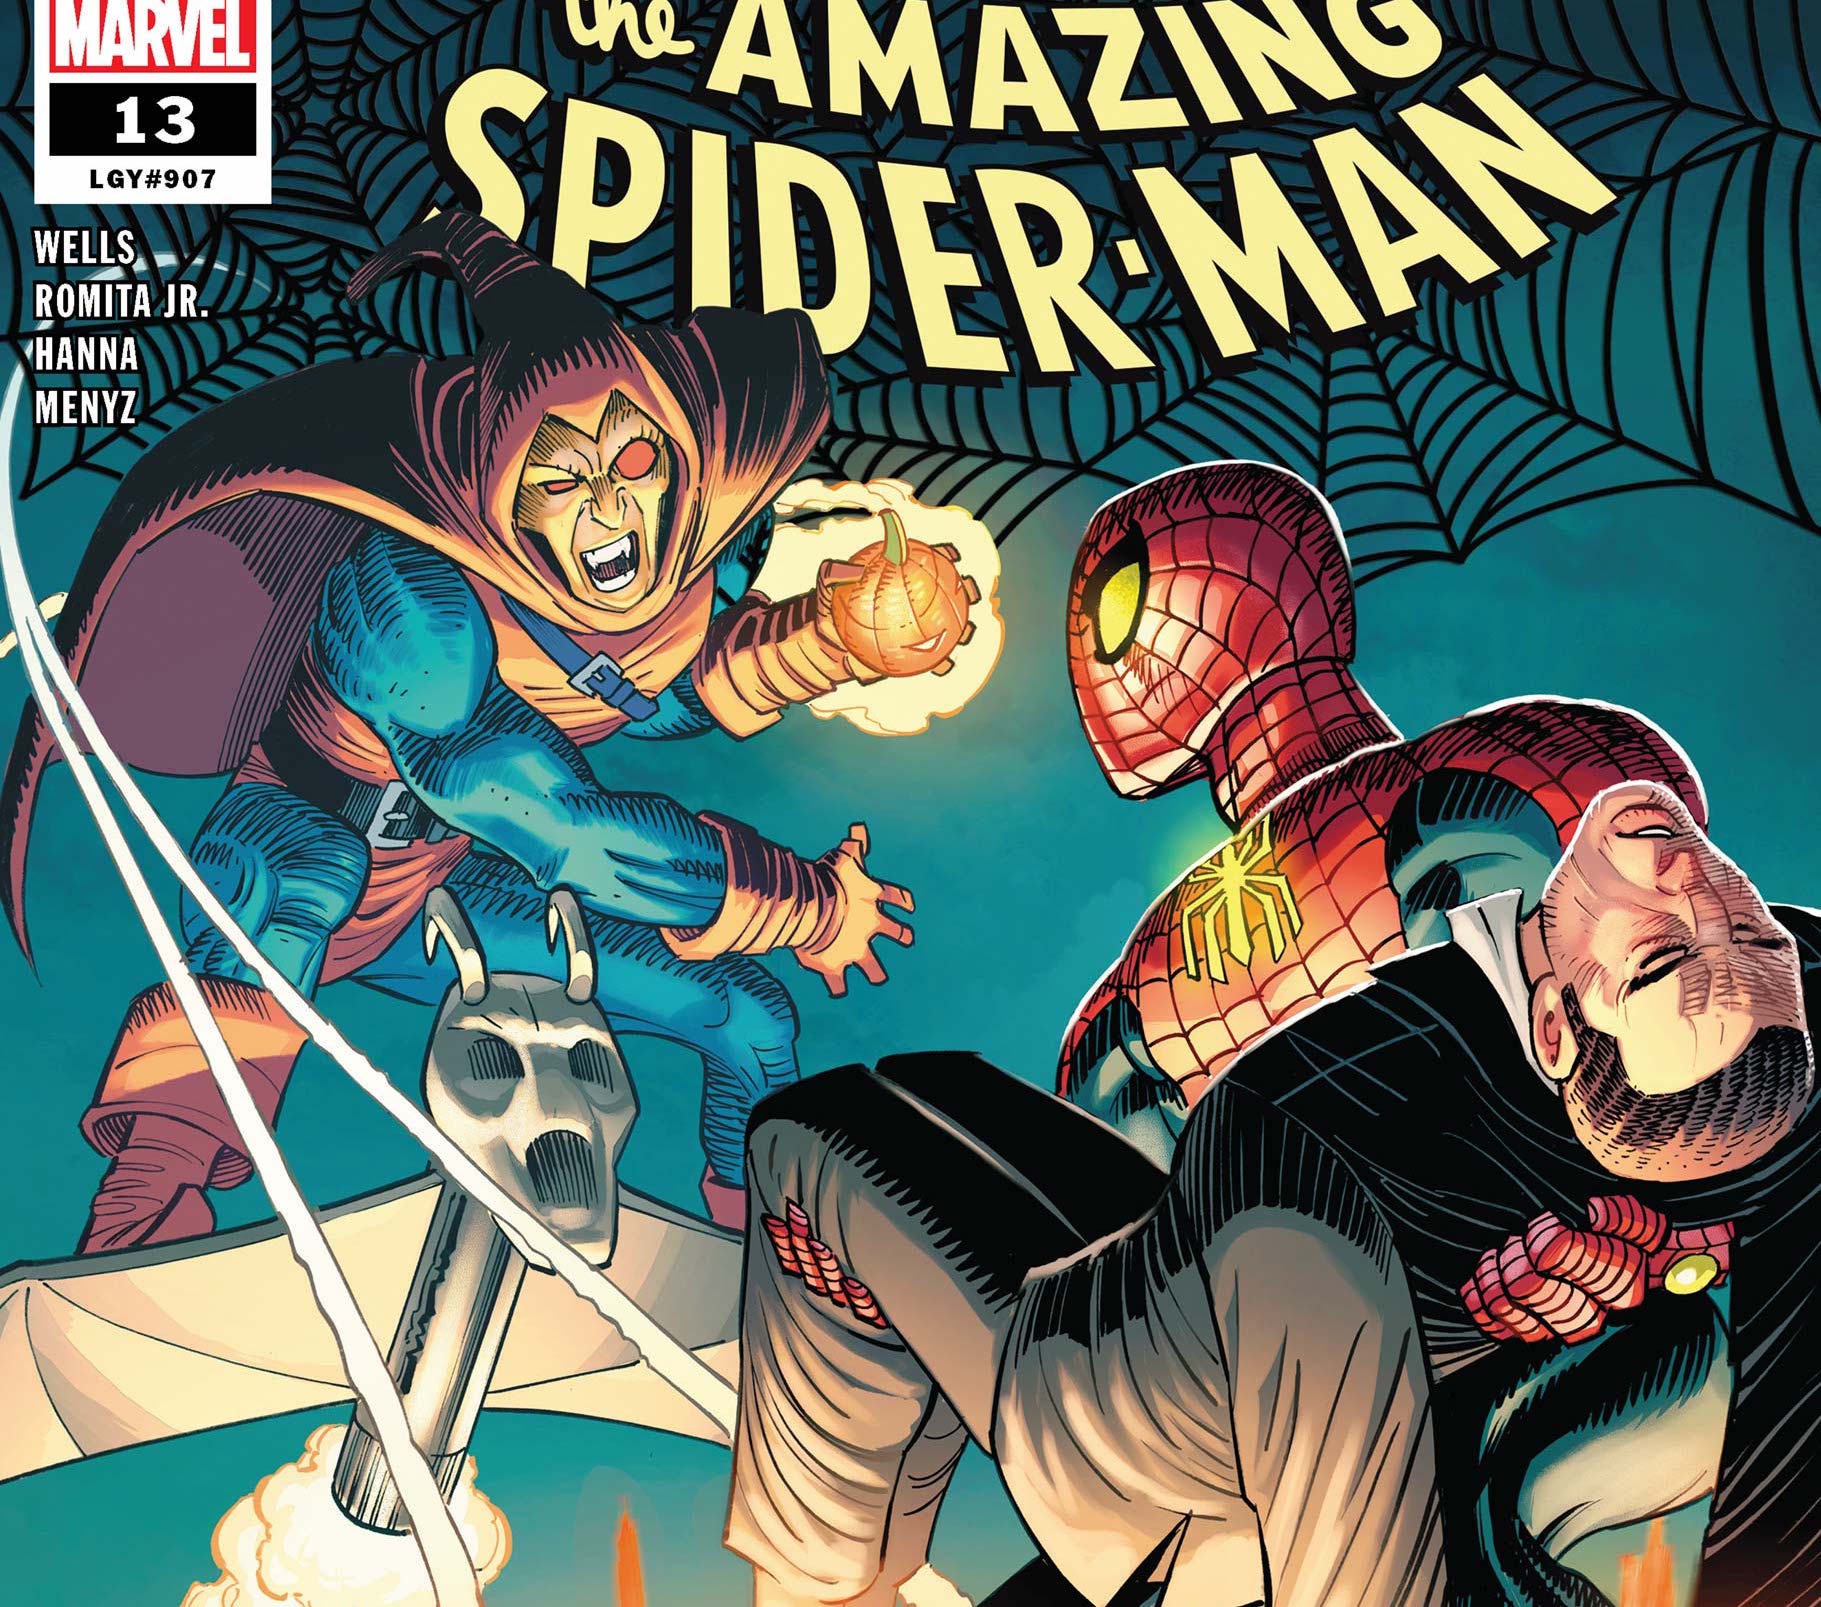 'Amazing Spider-Man #13' has more goblins than Spidey can stand